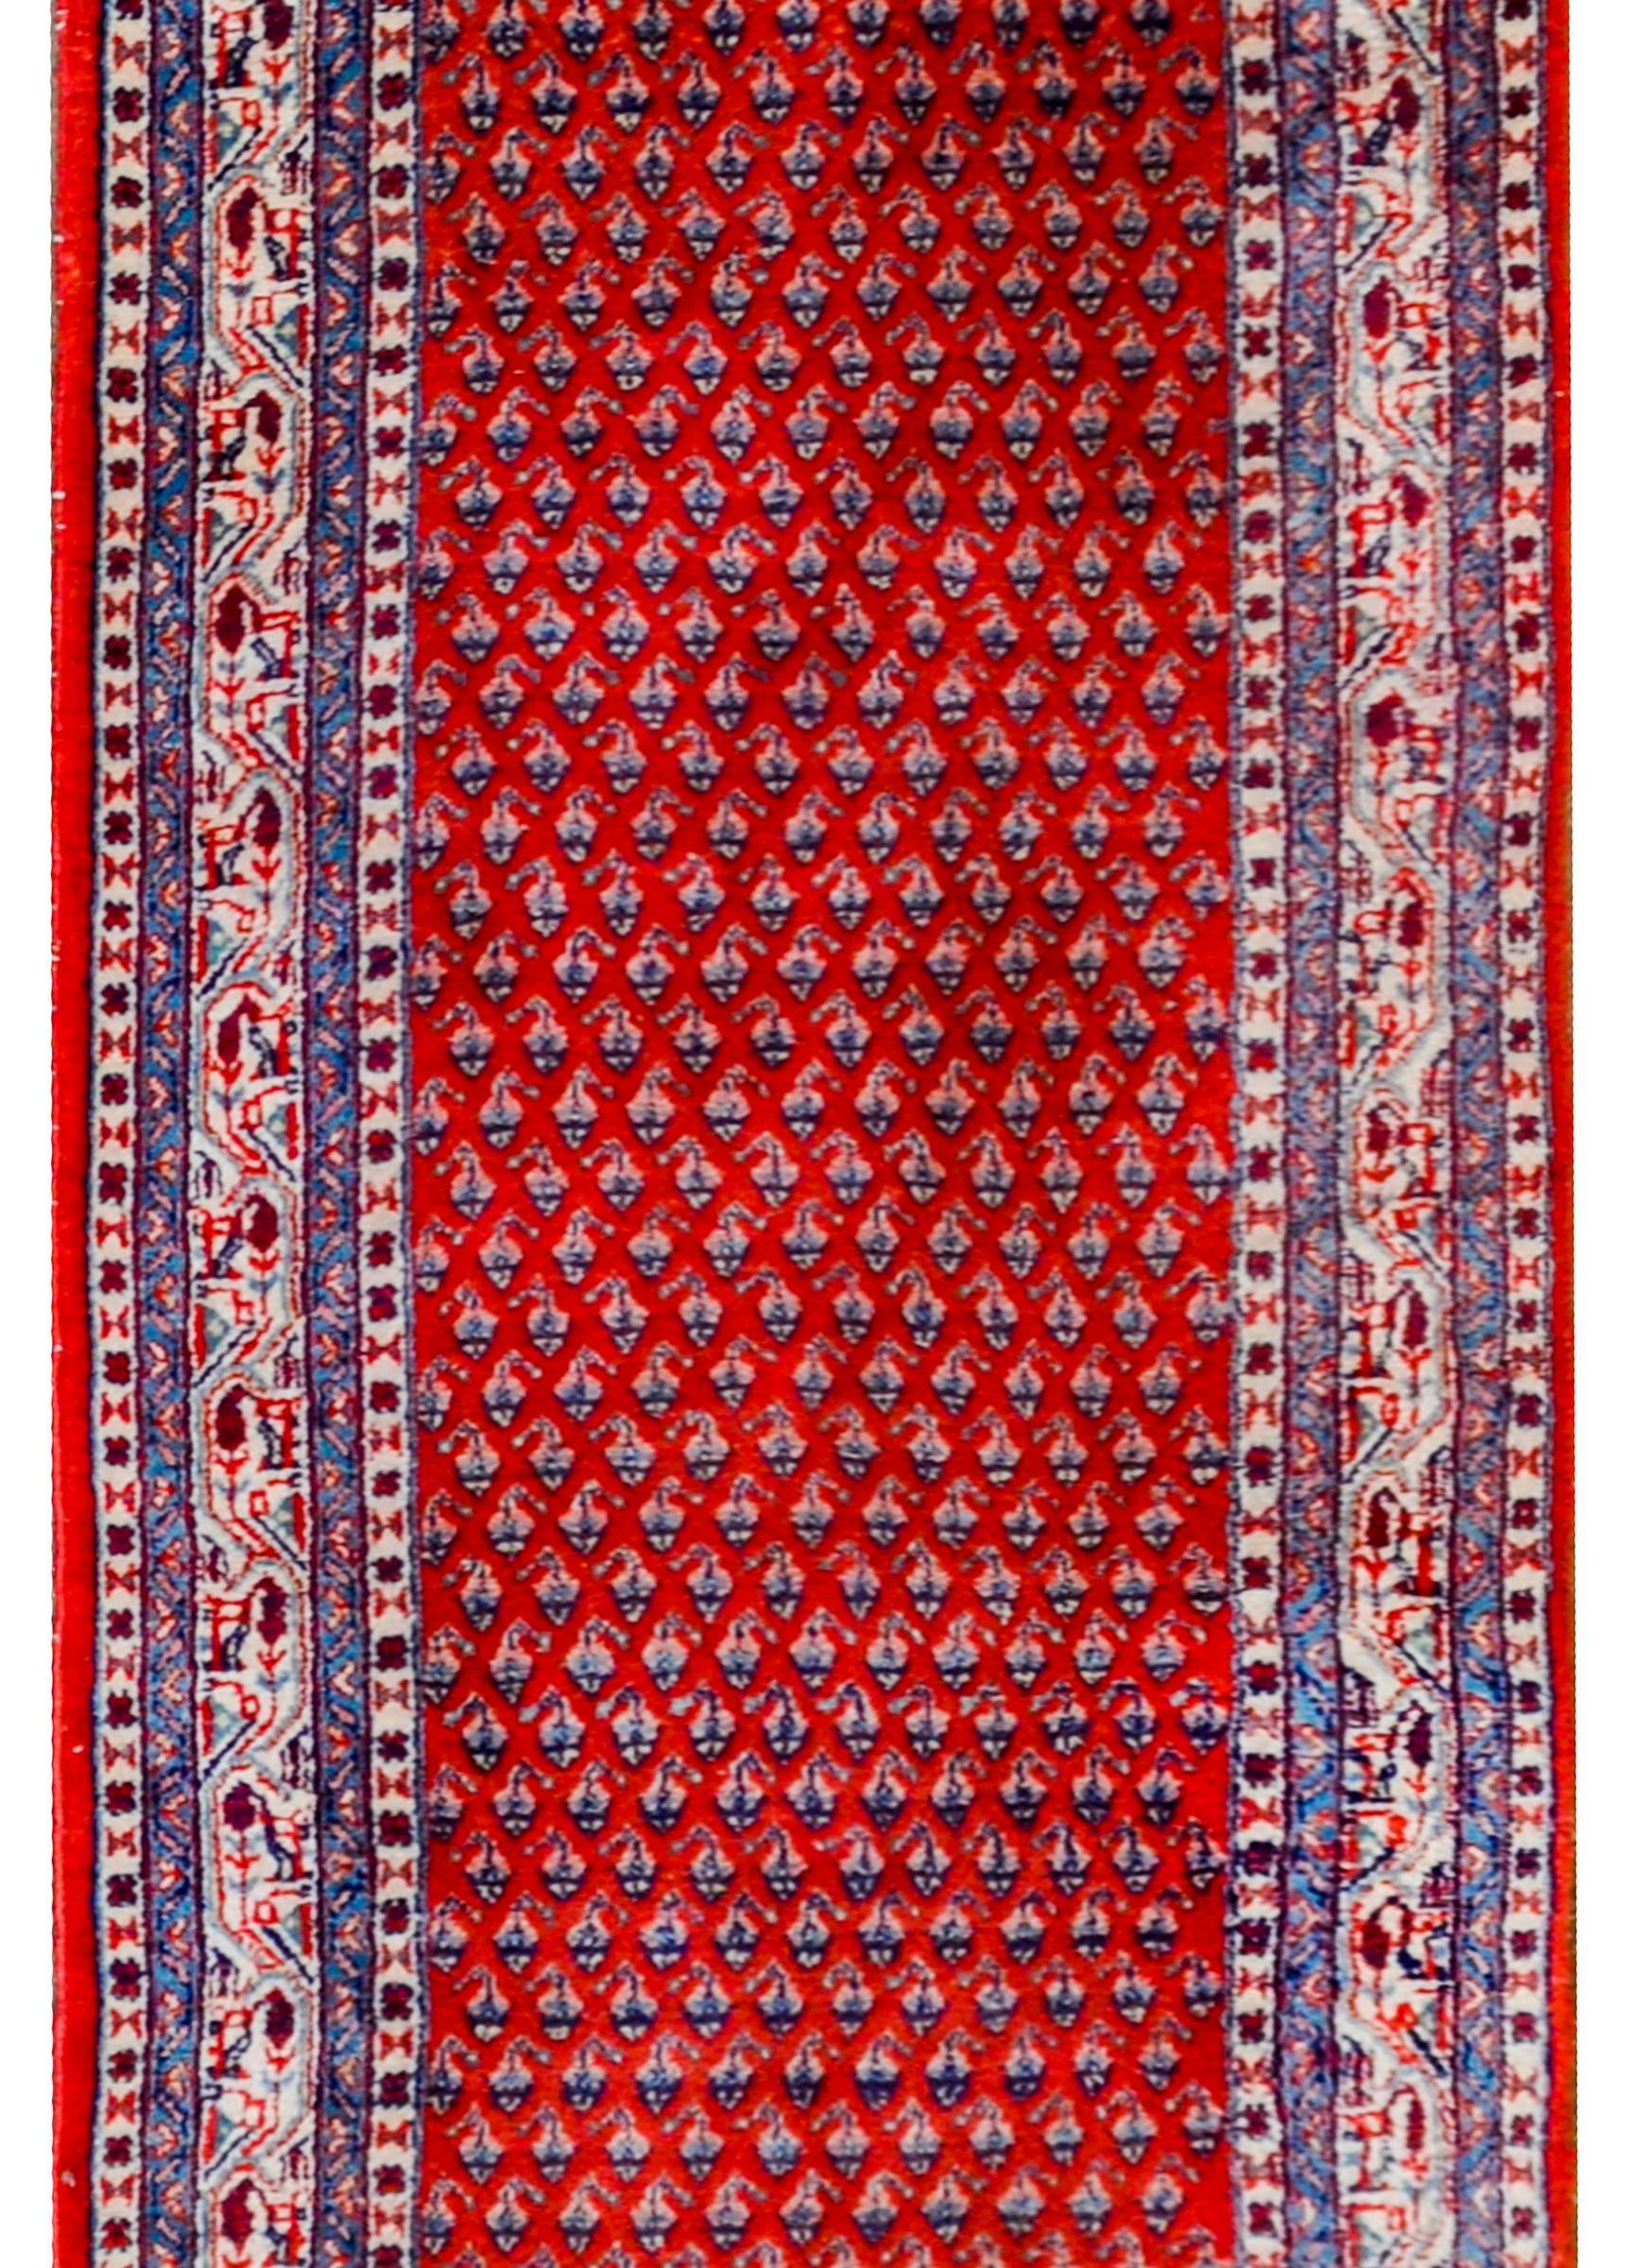 An incredible mid-20th century Mir Saroulk runner with an all-over paisley pattern on a crimson background surrounded by a complex border of multiple stylized floral and leaf patterned stripes.